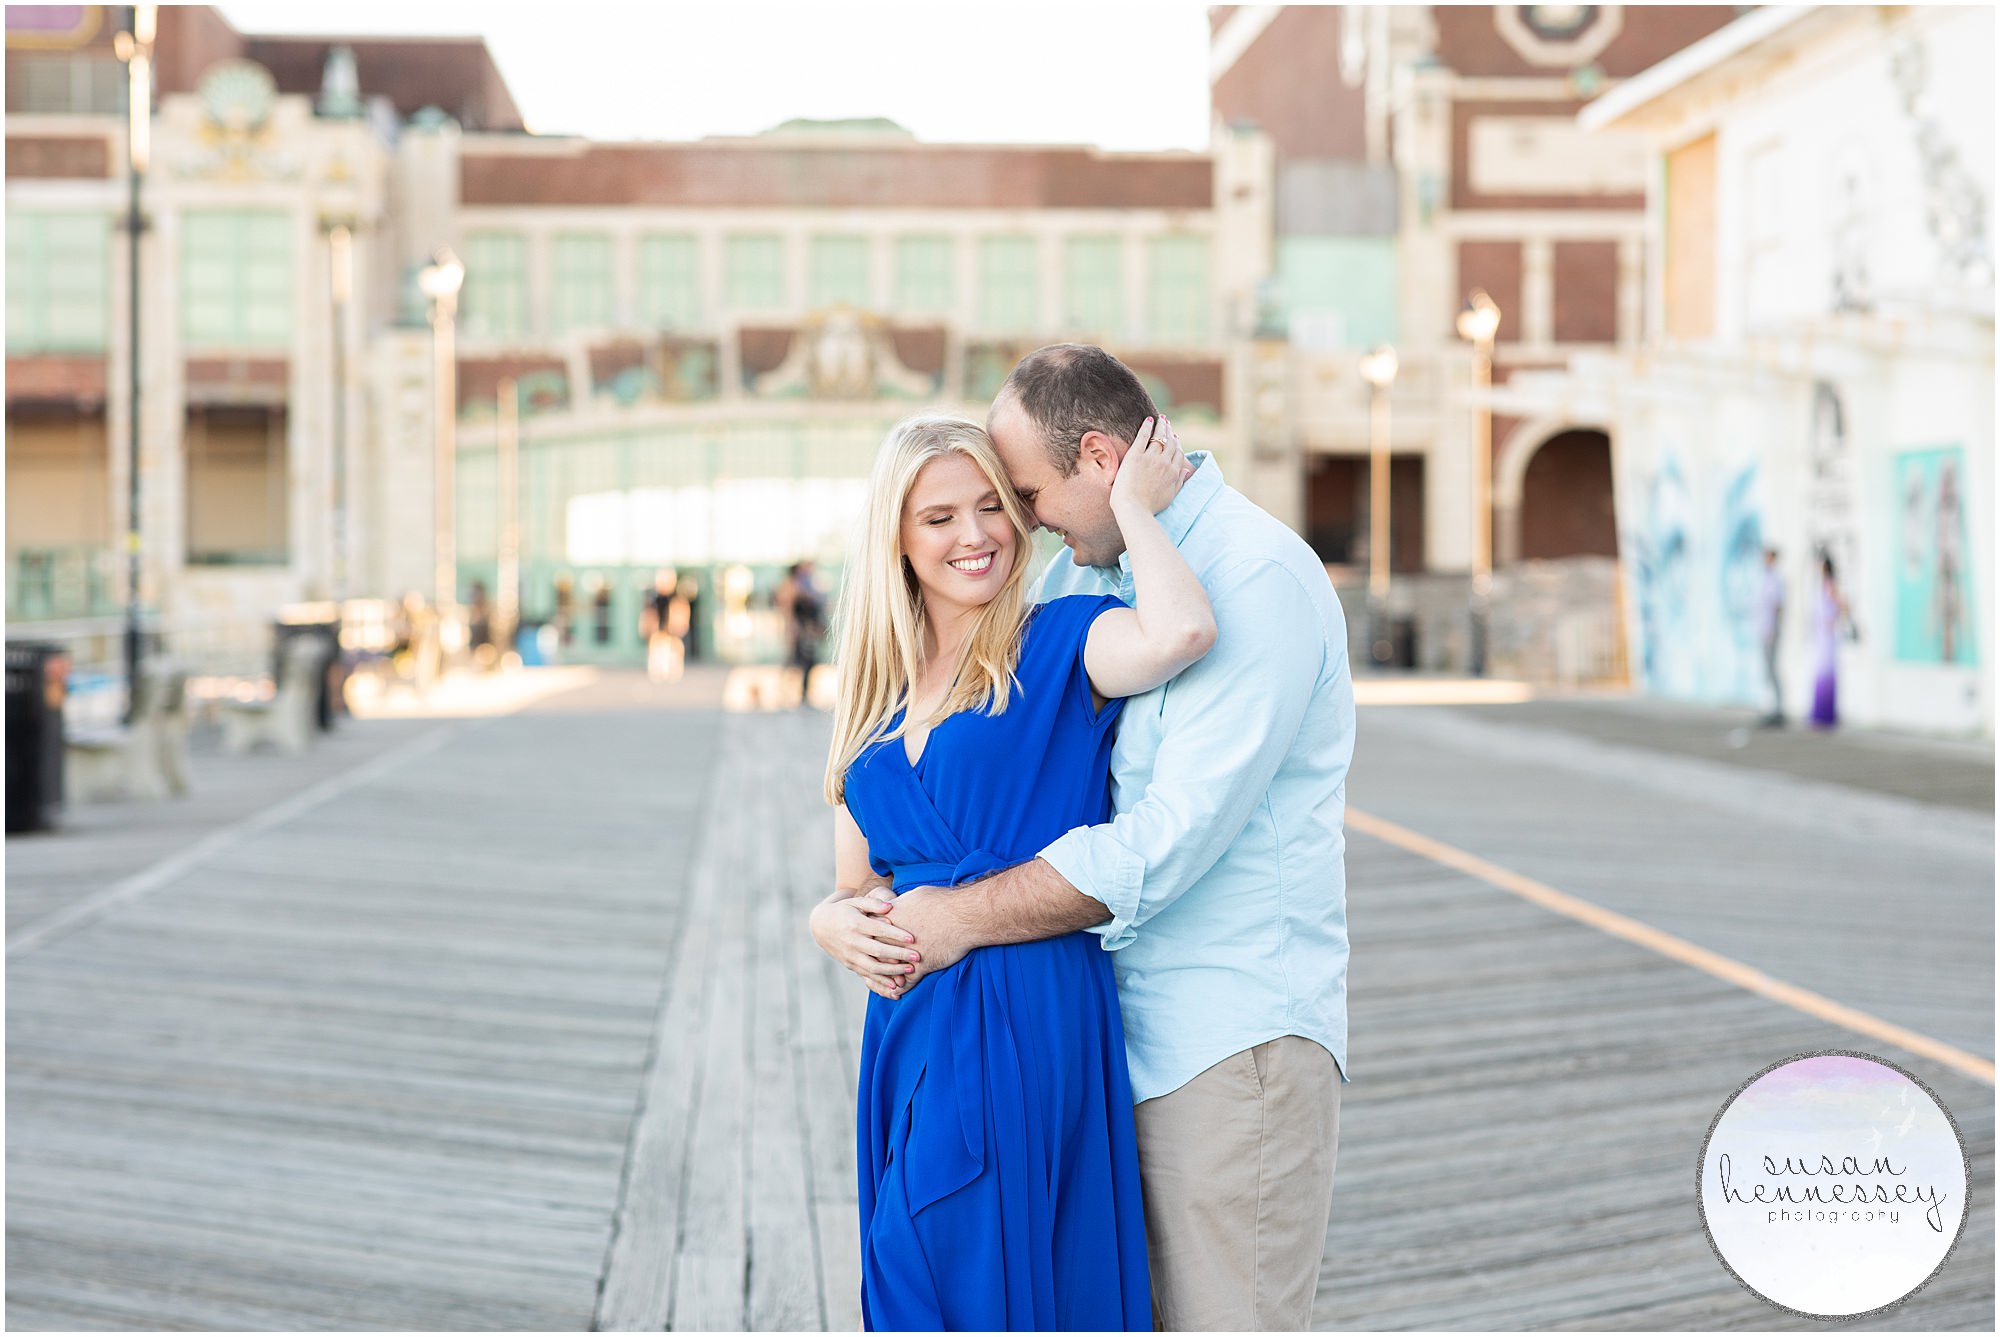 Engaged couple in shades of blue at Engagement Session at Asbury Park